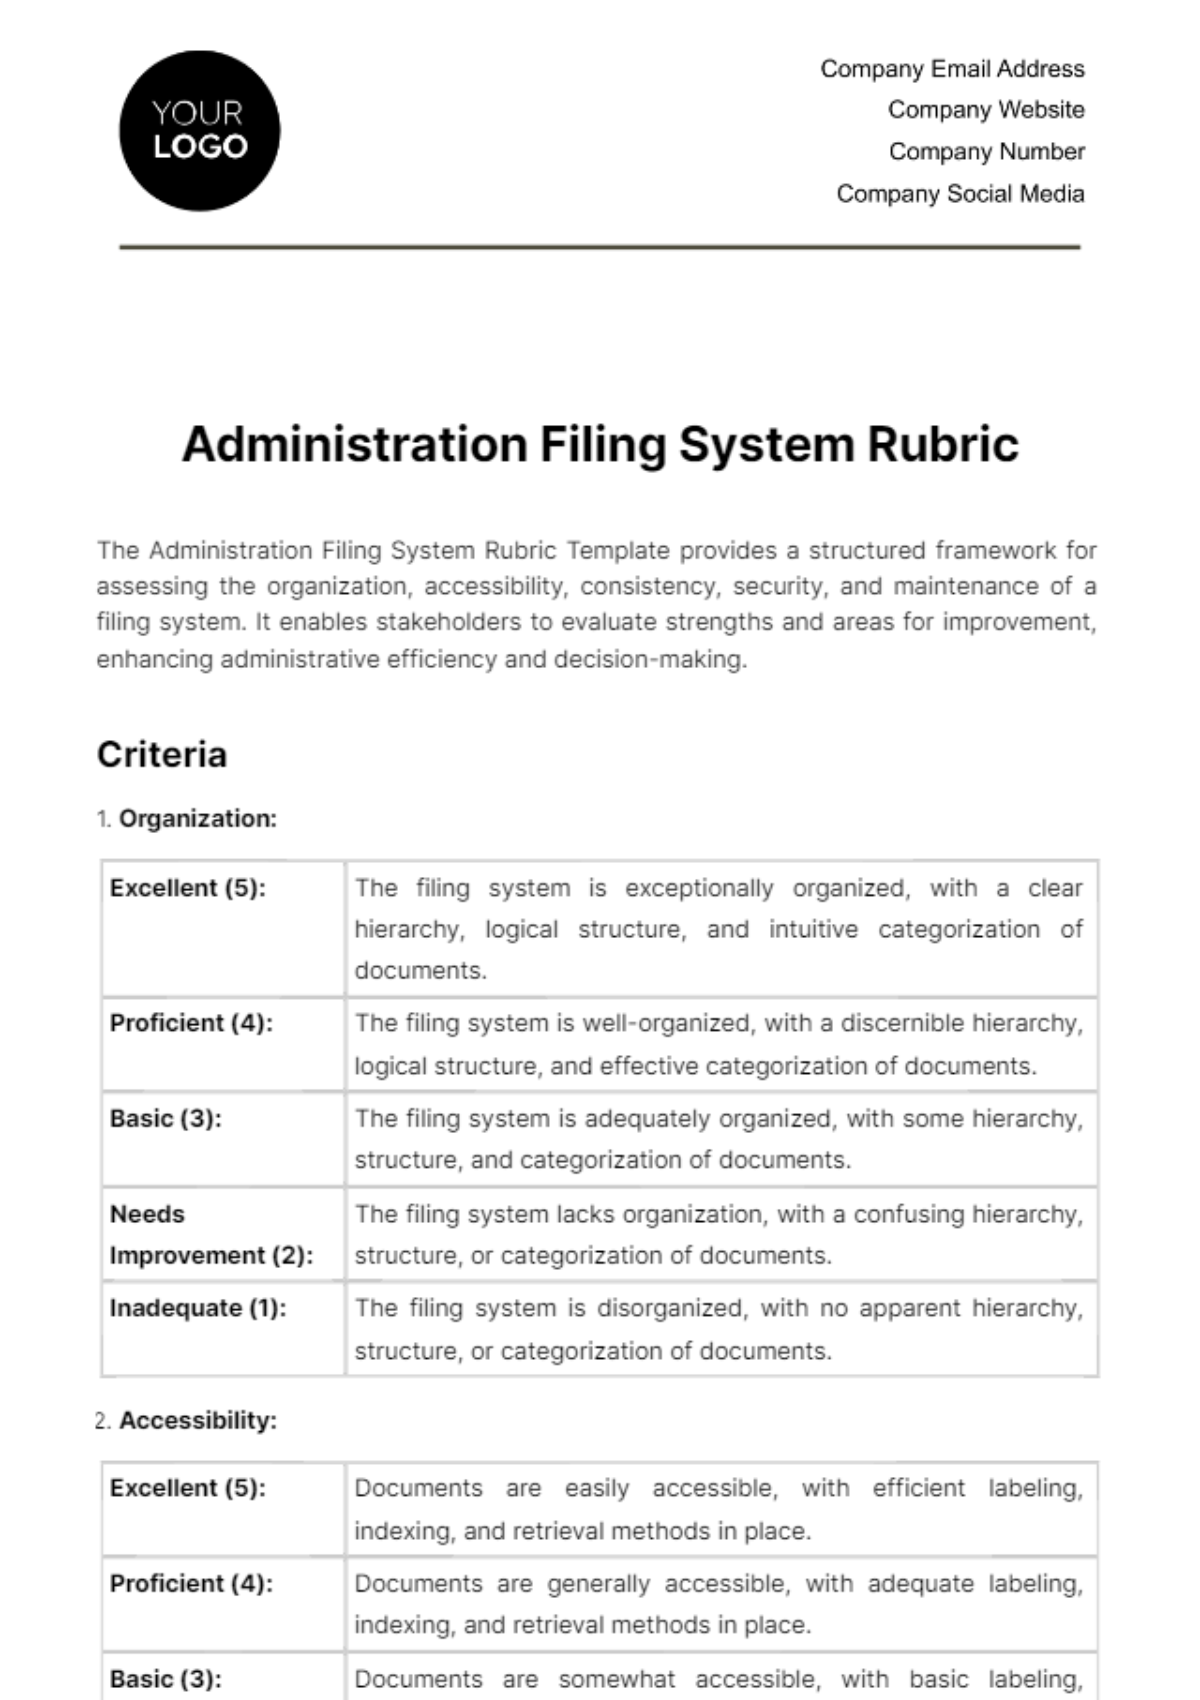 Free Administration Filing System Rubric Template